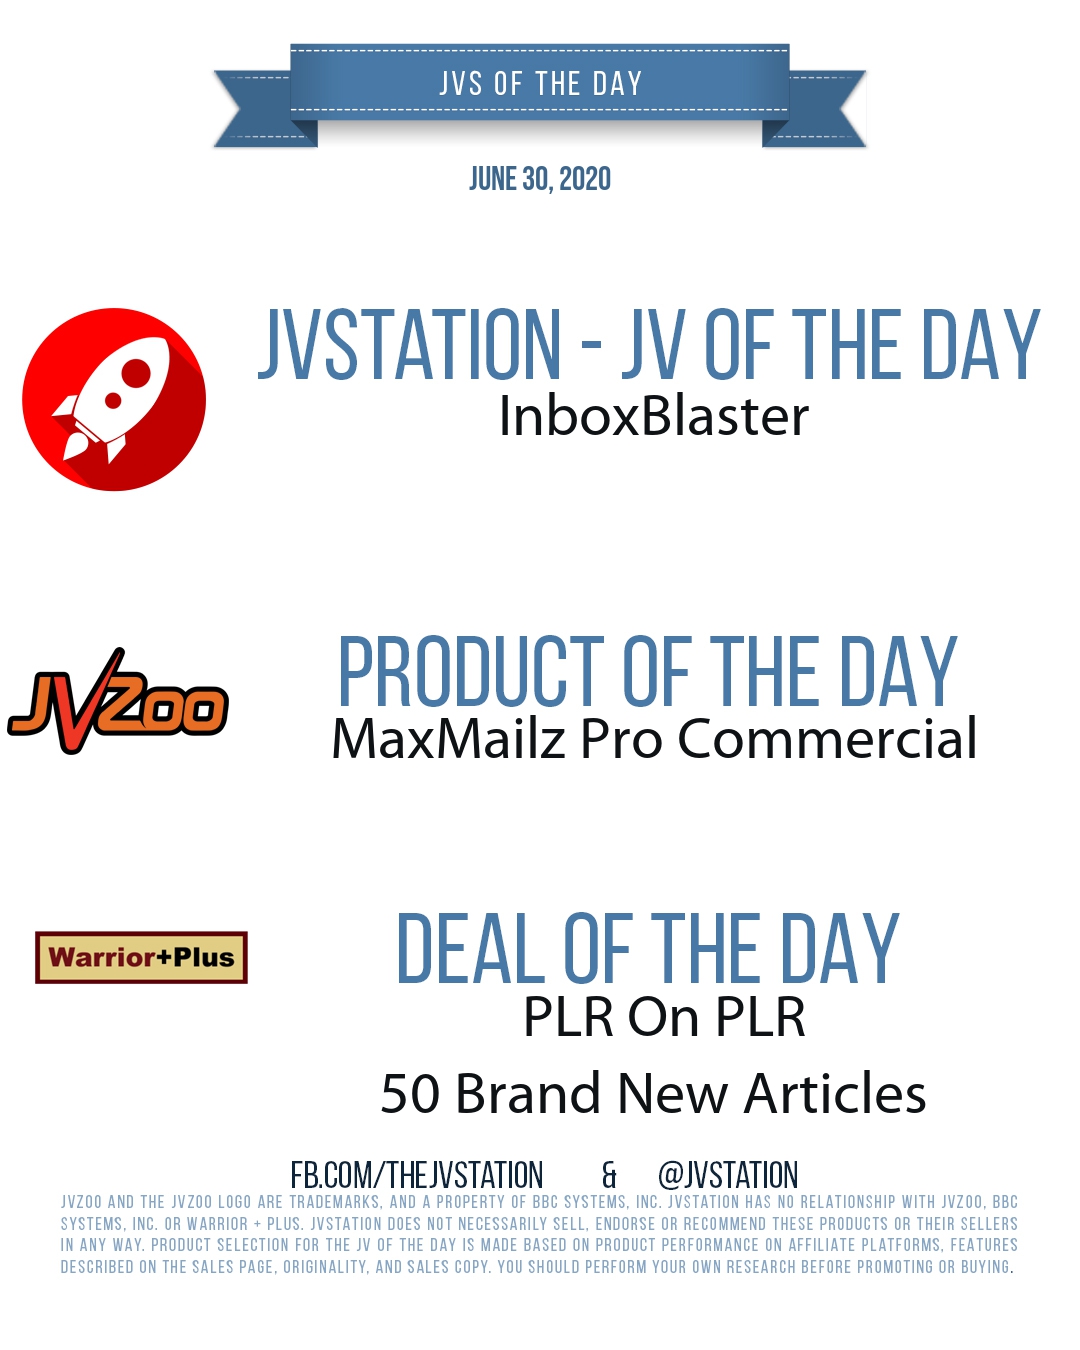 JVs of the day - June 30, 2020